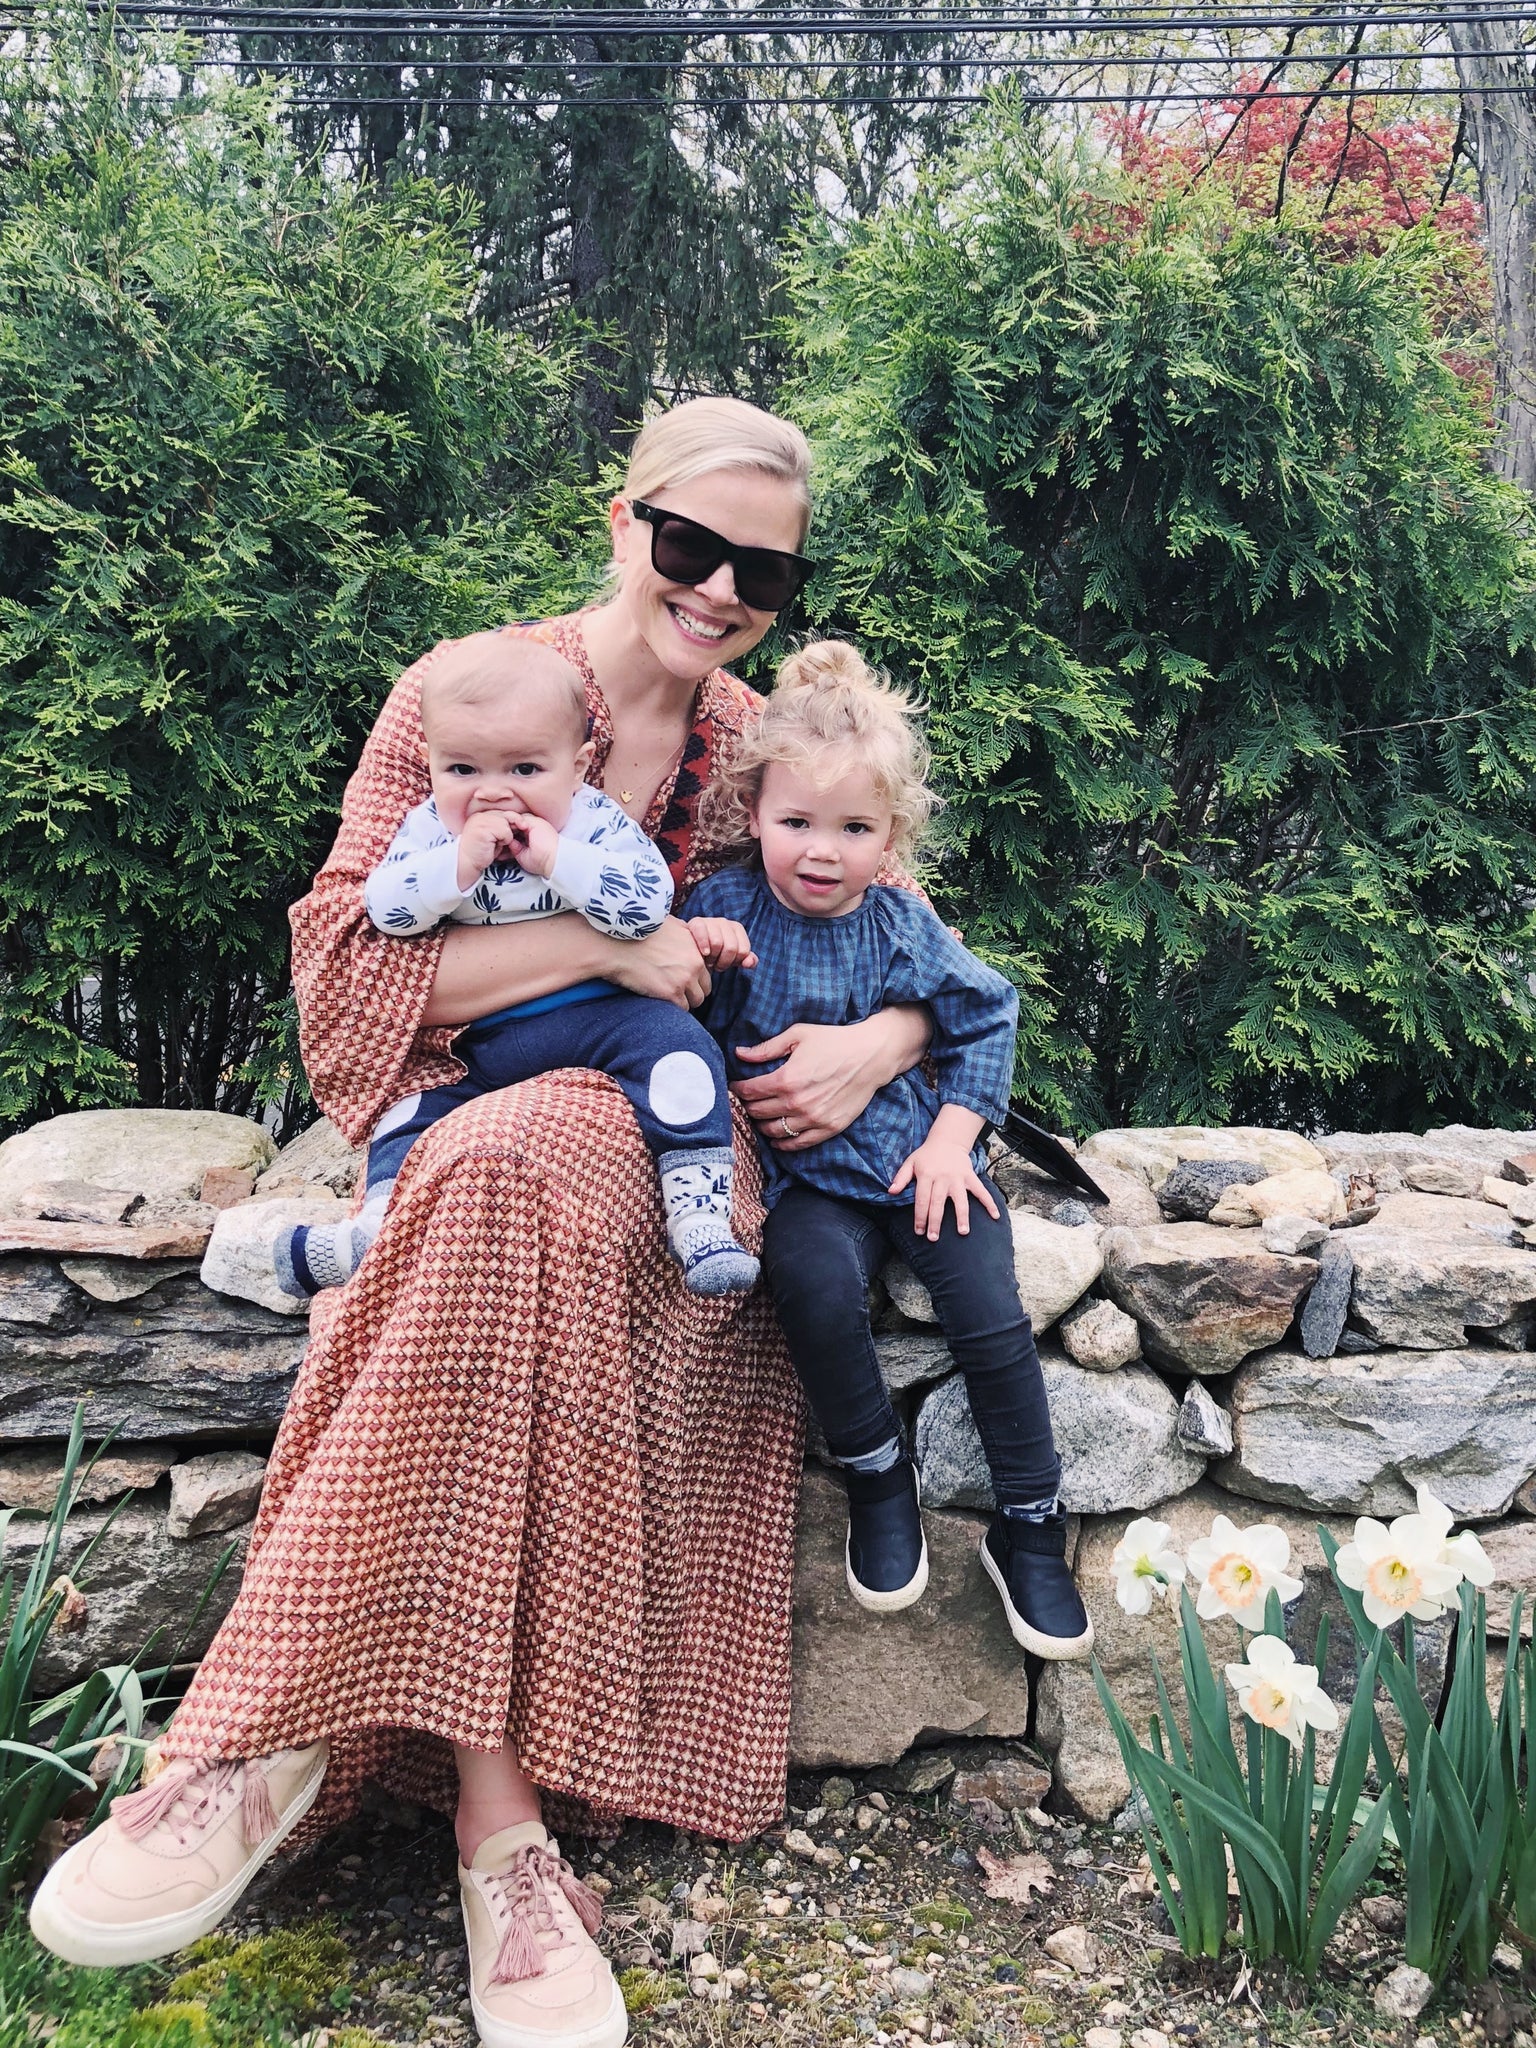 Lizzy Ott and her two babies in park in Manhattan, New York